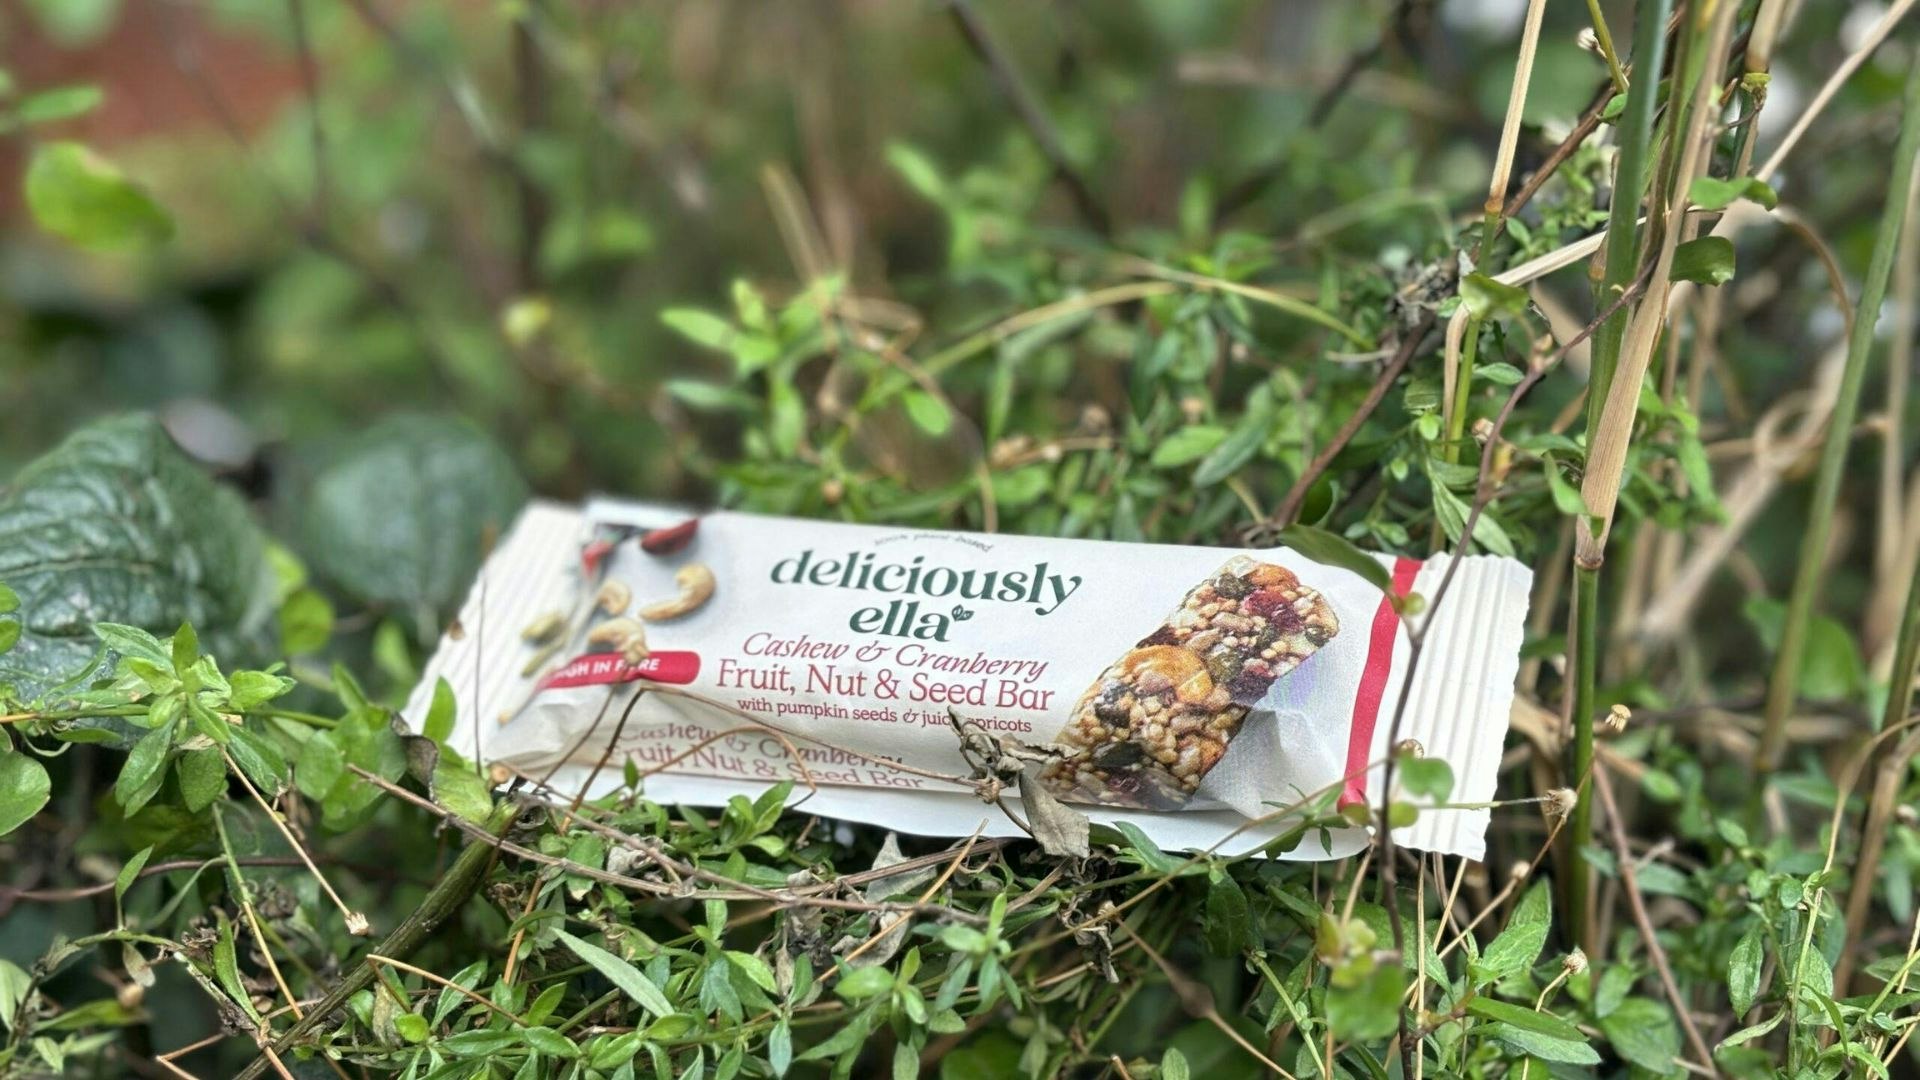 Deliciously Ella Fruit, Seed, and Nut bar